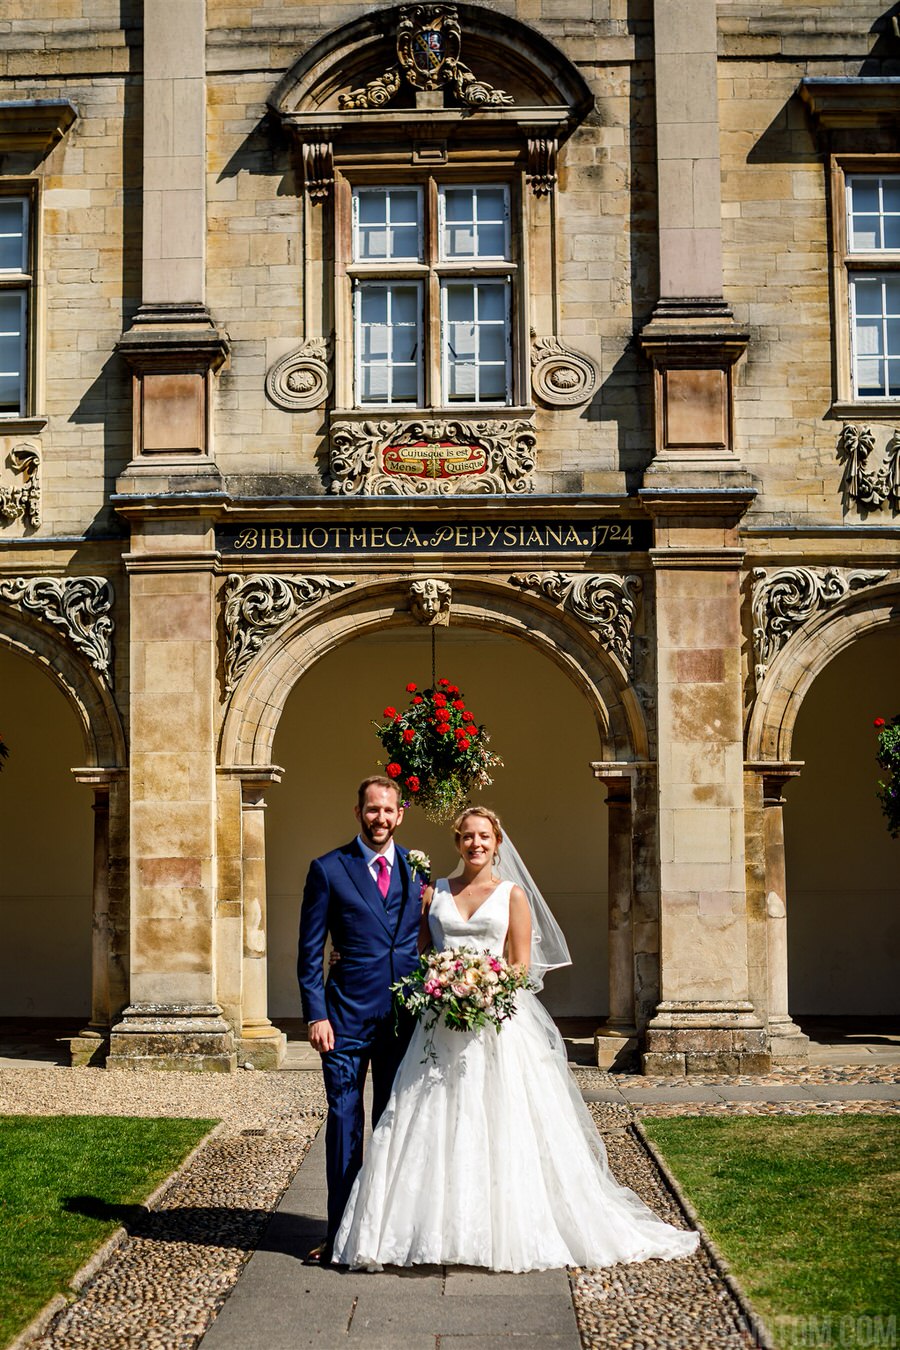 Steph & Tom’s classic, timeless Magdalene College wedding, with photography by Lina and Tom